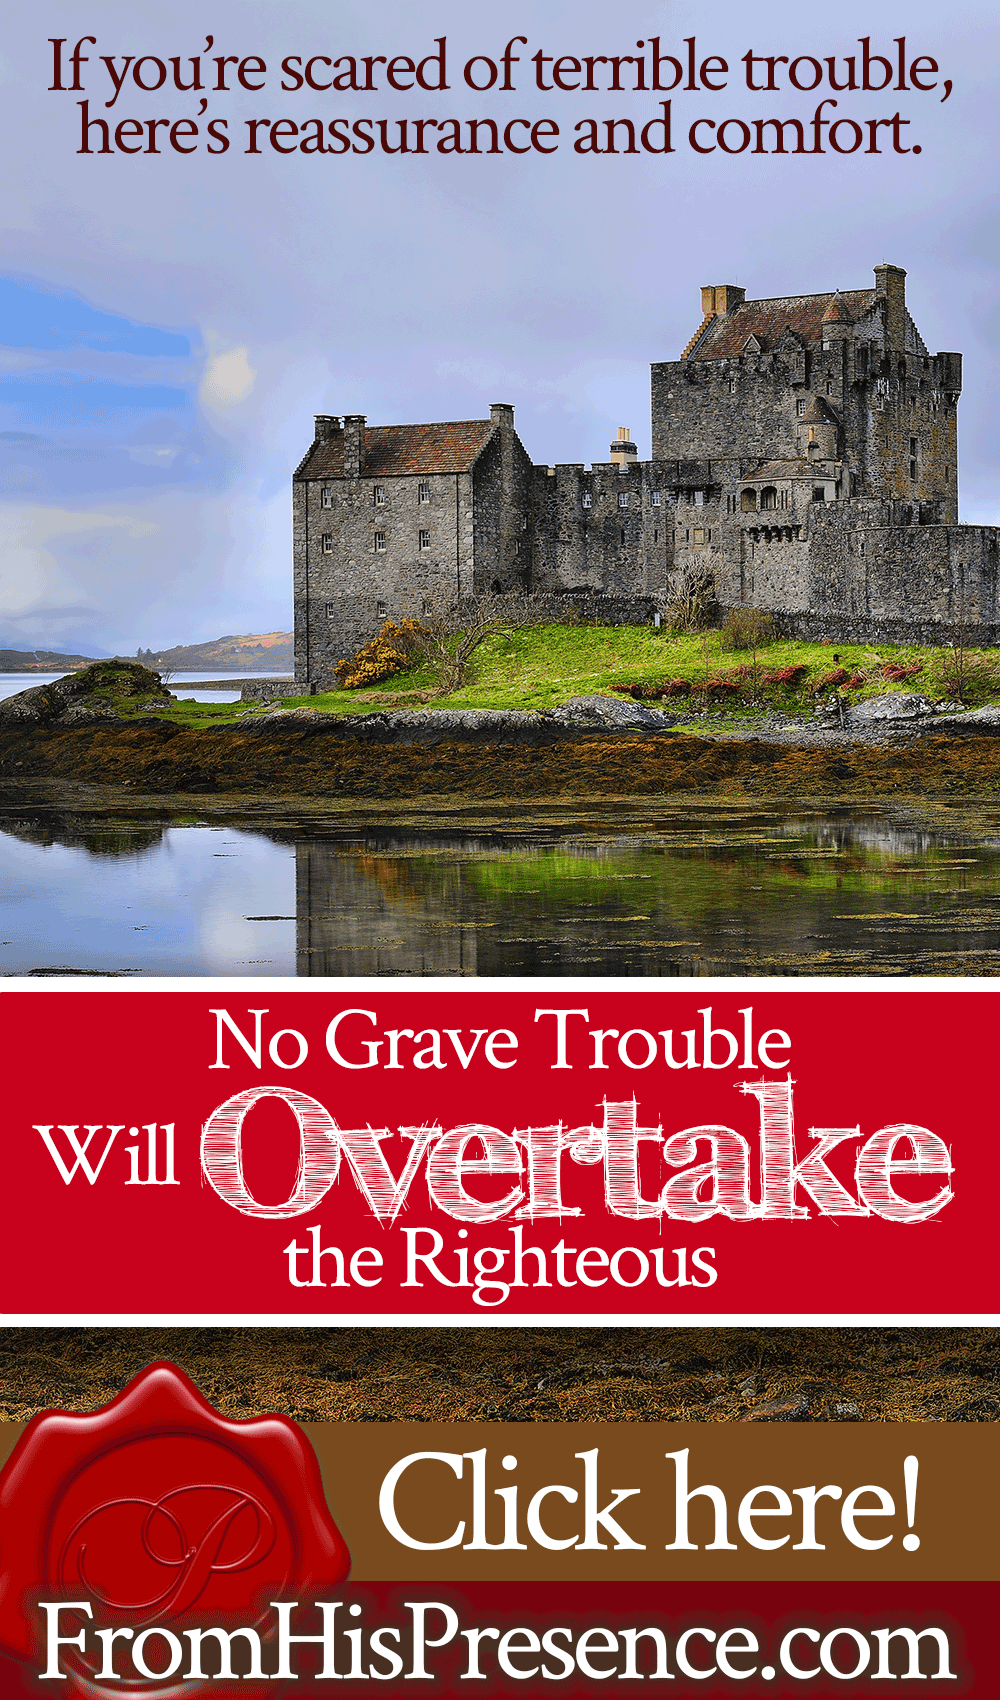 No Grave Trouble Will Overtake the Righteous | Encouraging word by Jamie Rohrbaugh | FromHisPresence.com